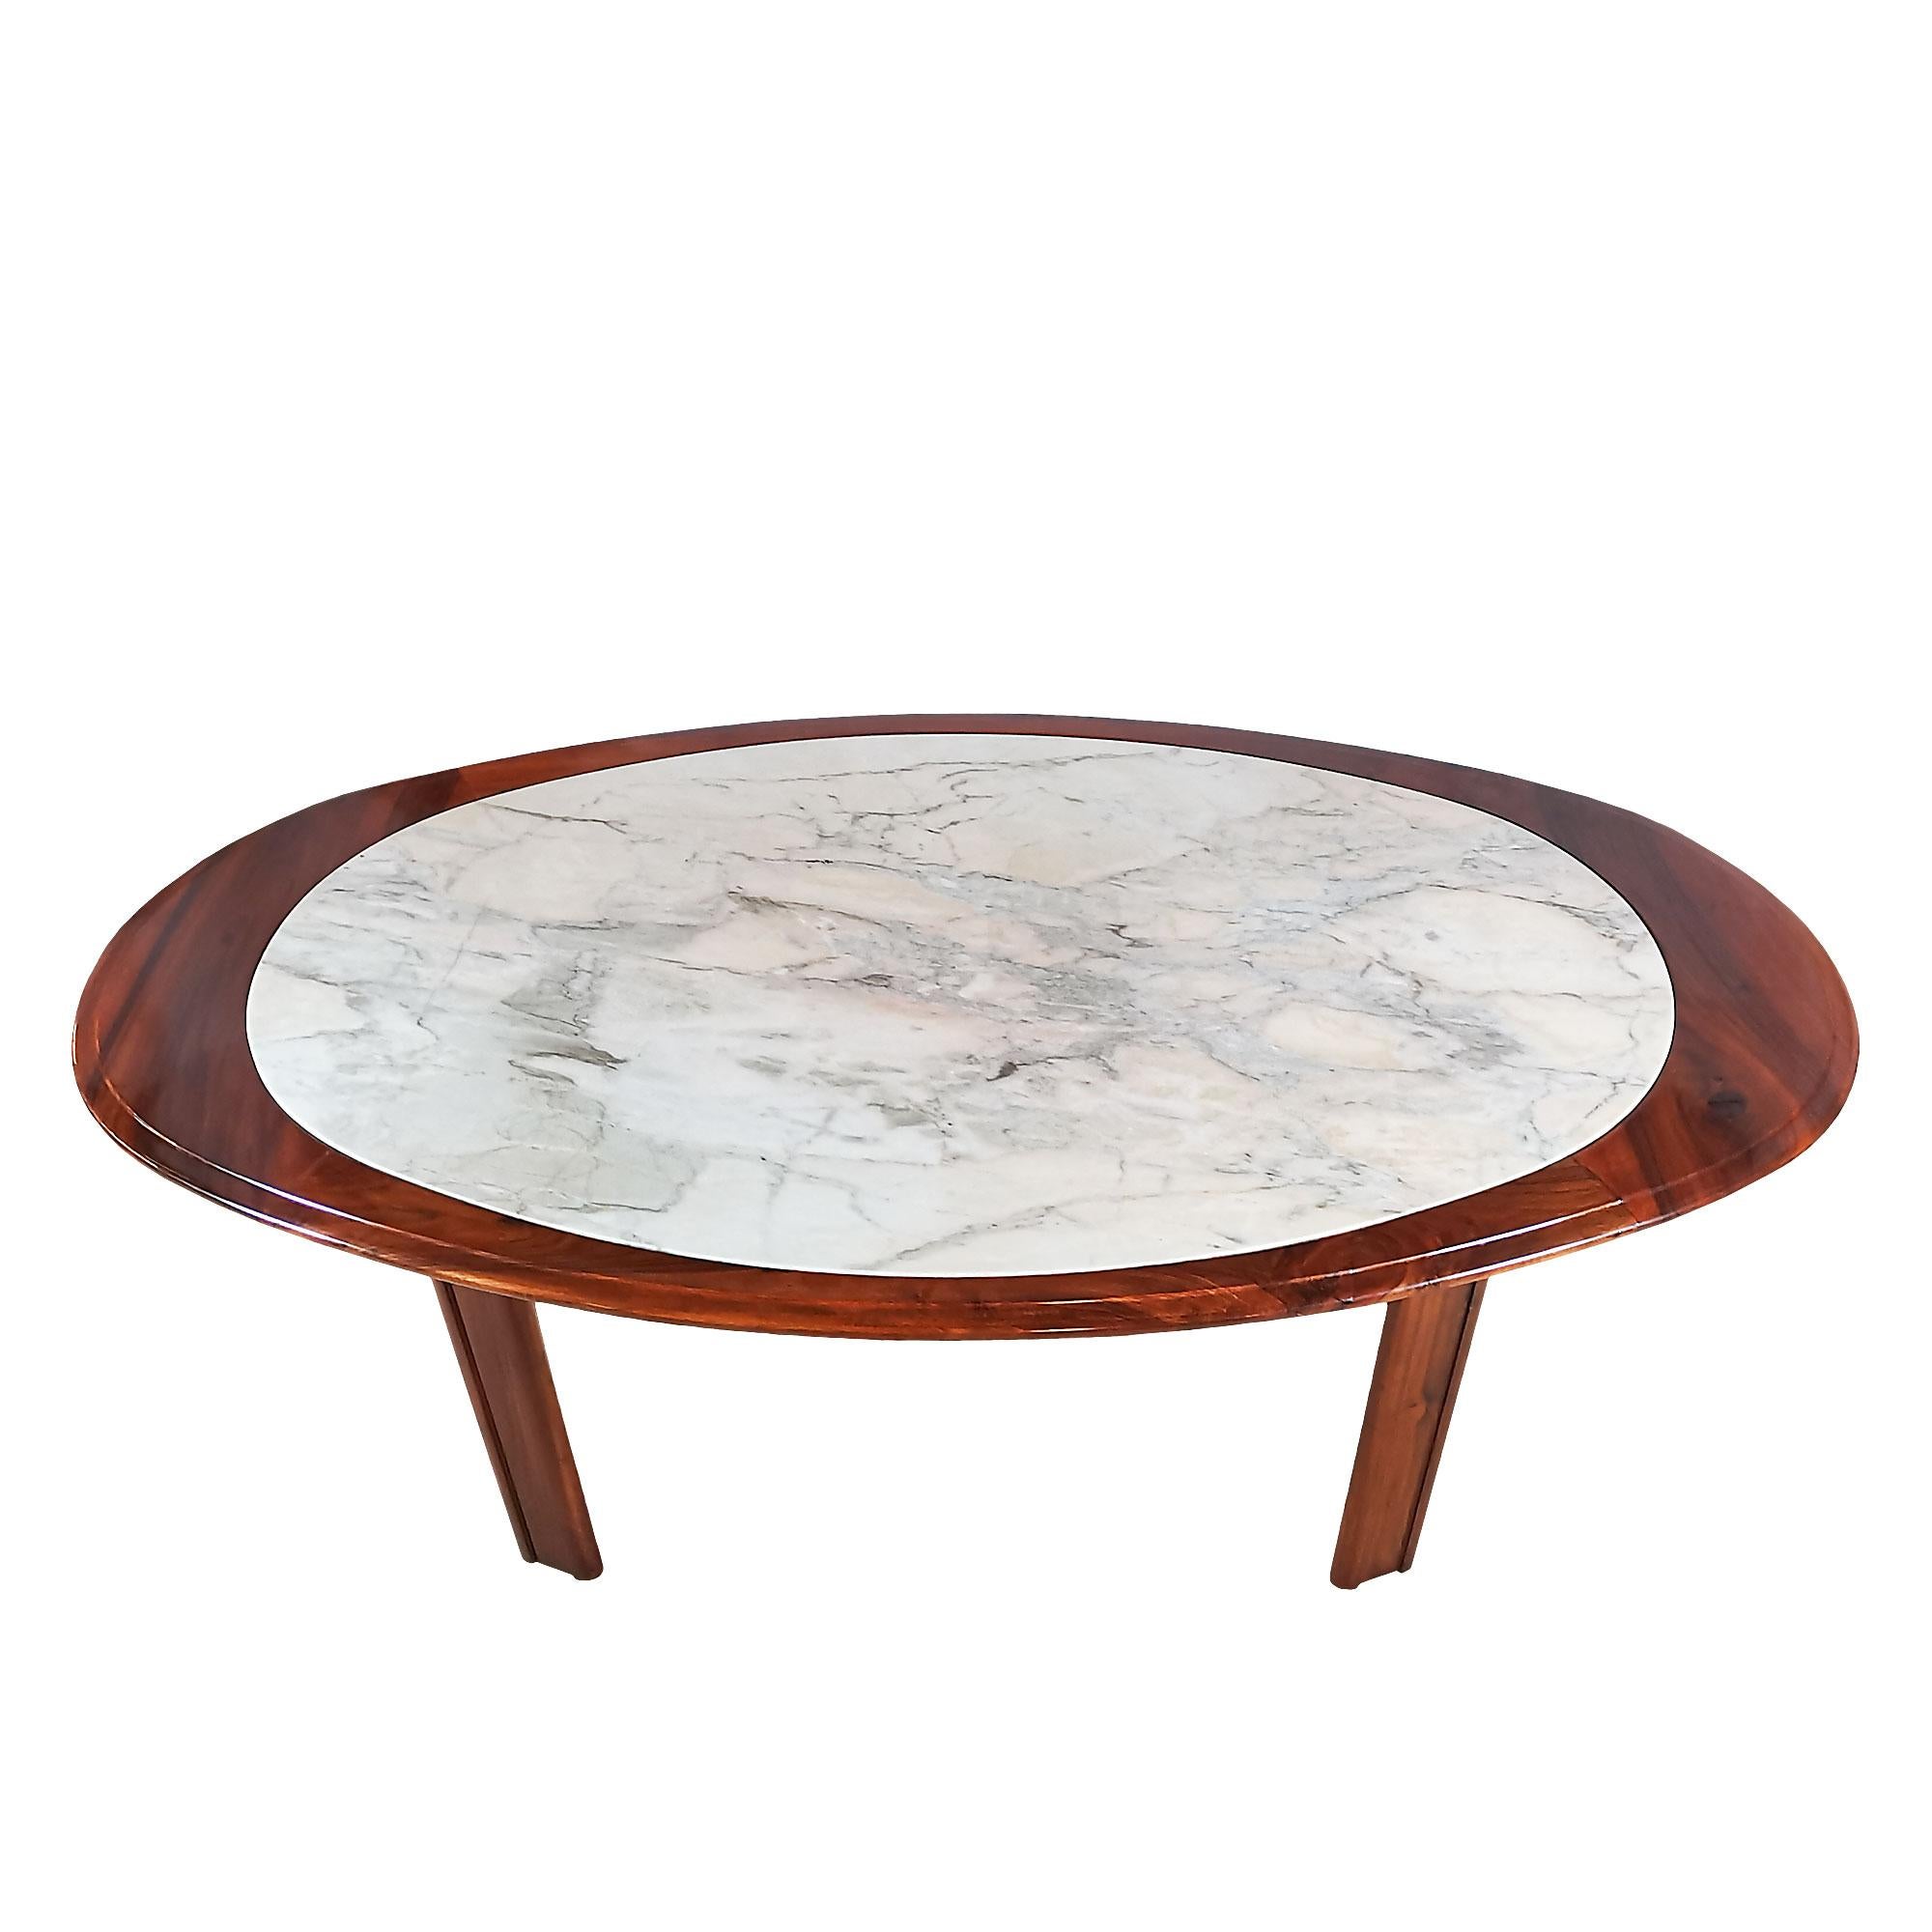 Polished Modern Oval Table in Solid Walnut with Marble Top - Italy, 1970 For Sale